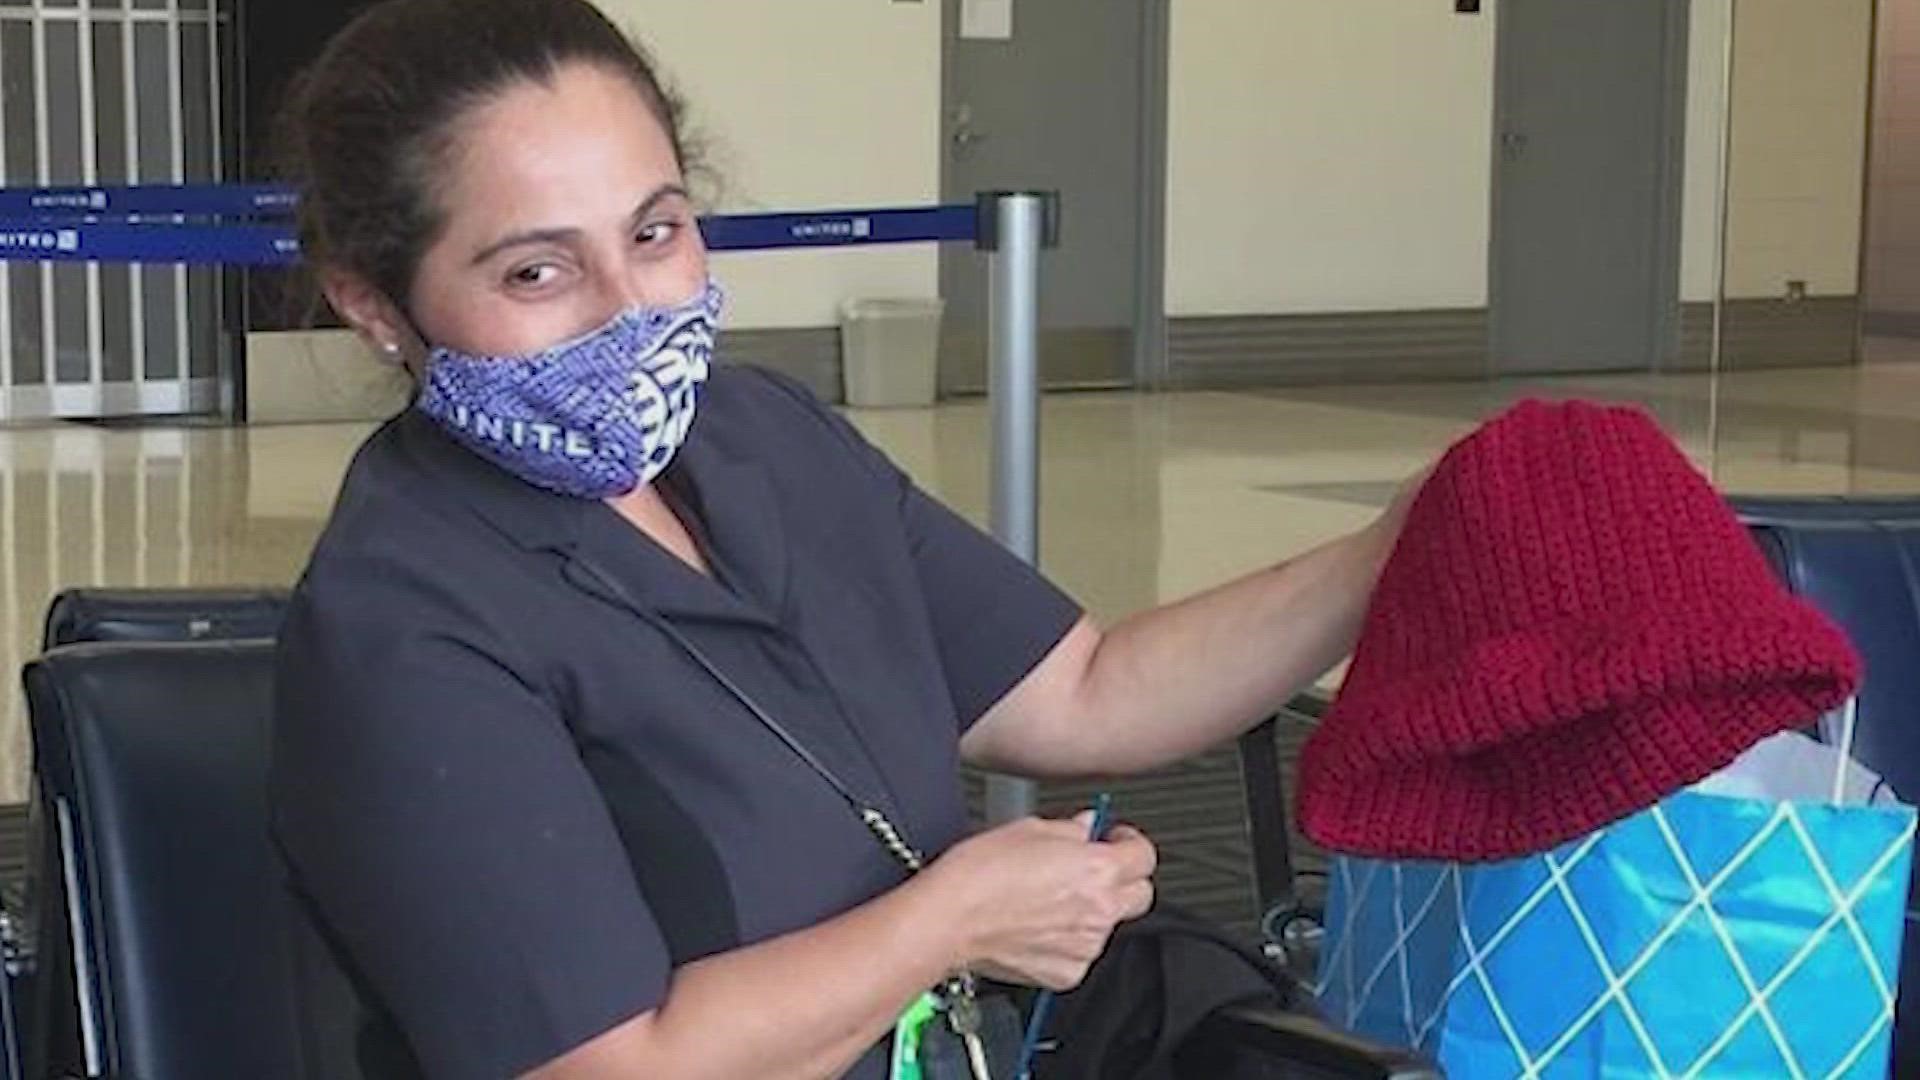 United Airlines employees at Bush Airport donated handmade scarves and hats, socks, gloves, blankets and hygiene kits to make about 400 care packages.